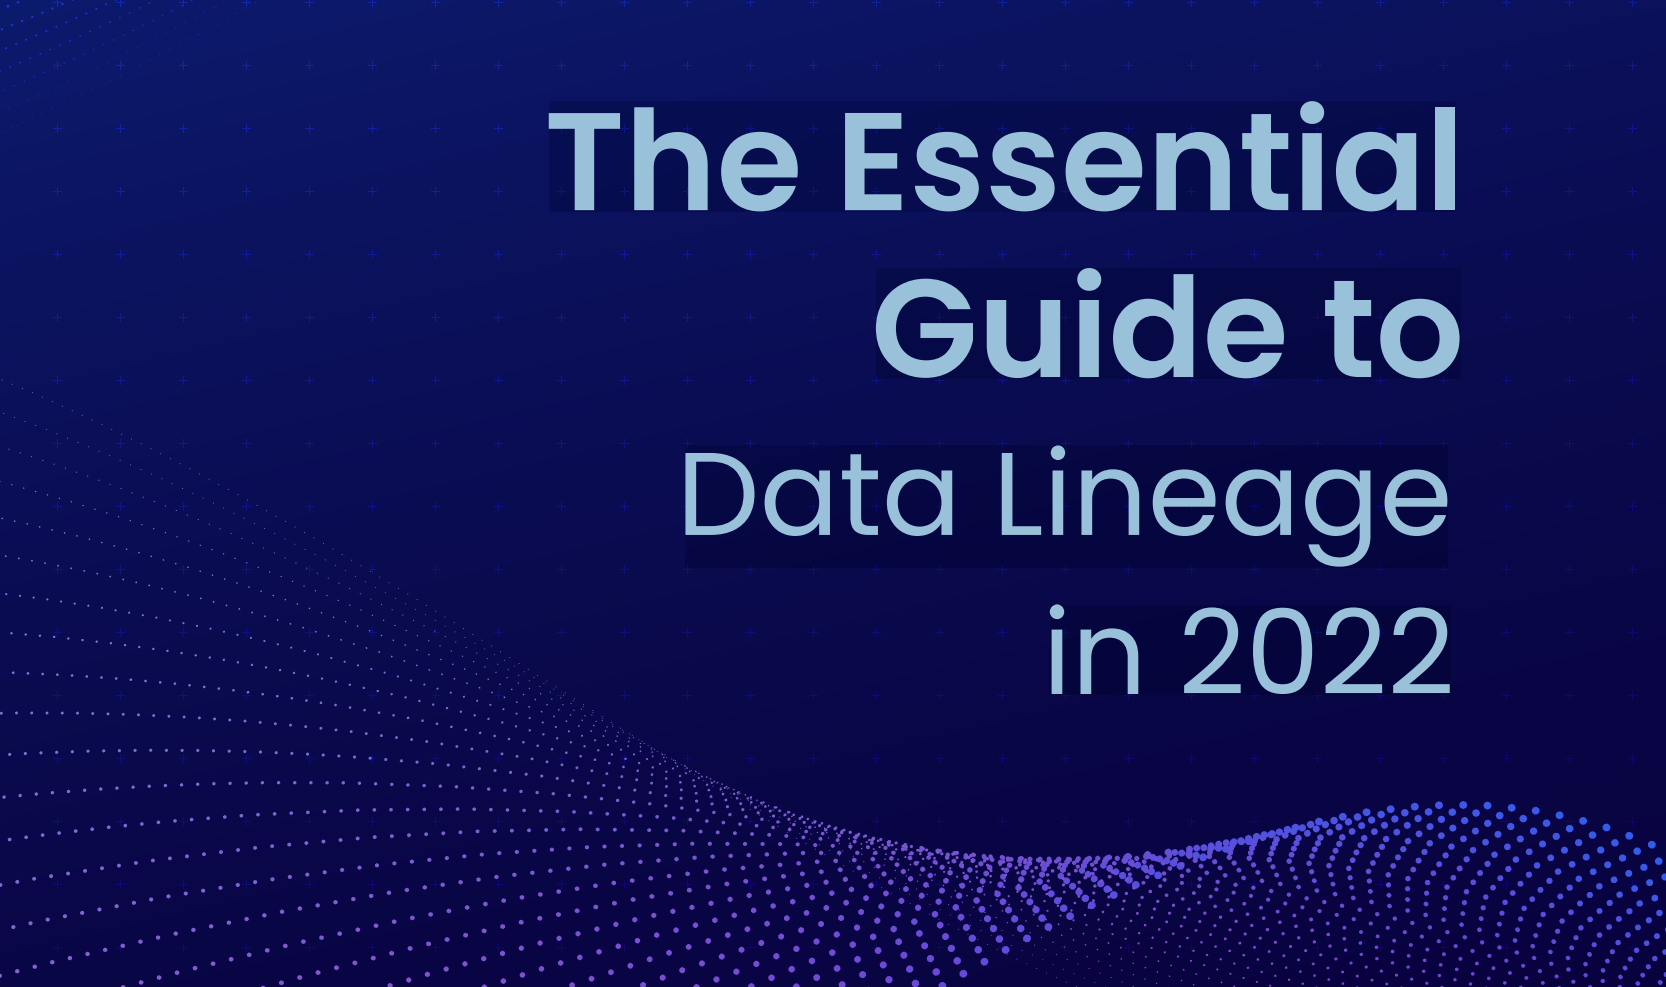 The Essential Guide to Data Lineage in 2022